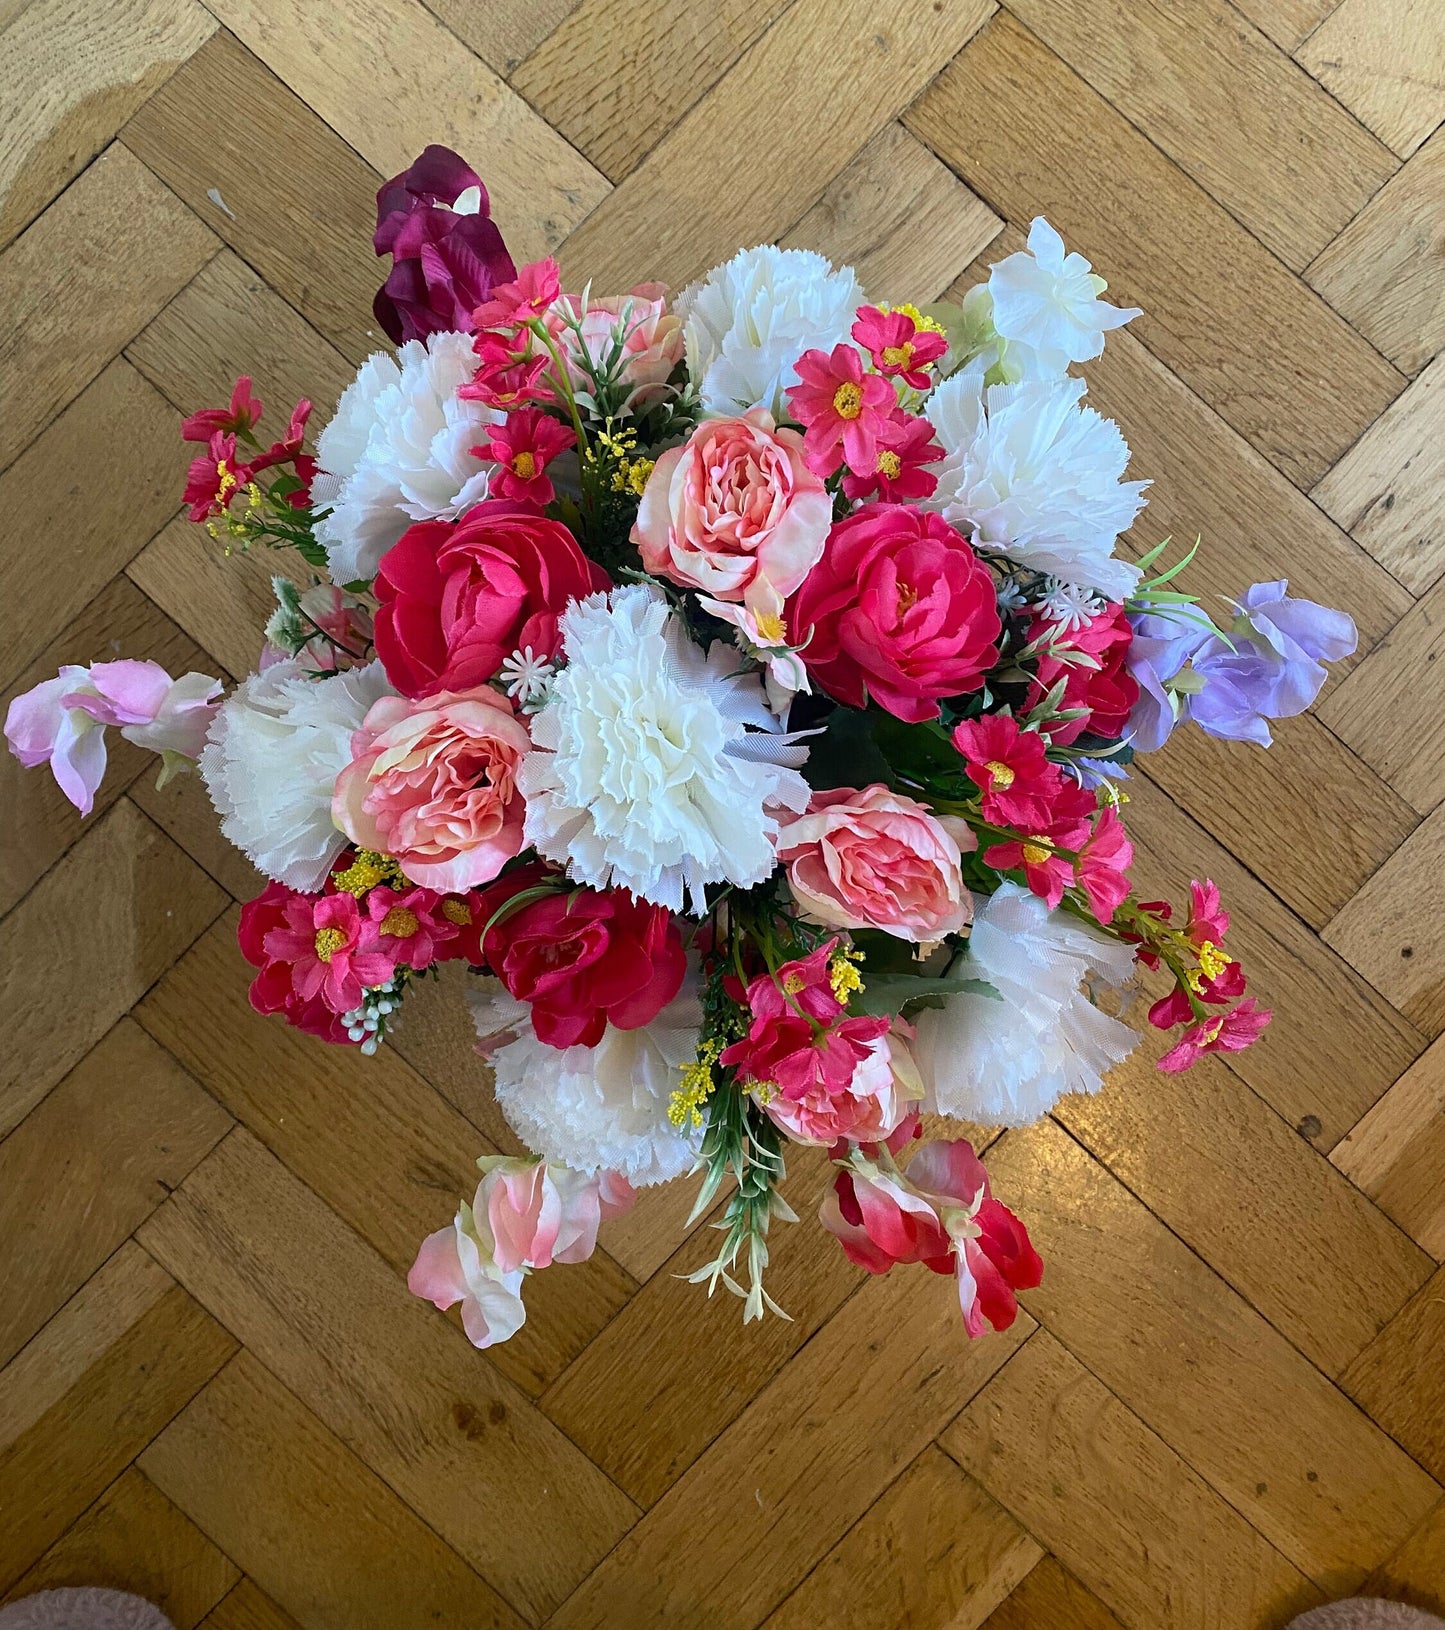 Artificial Grave Flower Arrangement with Peonies, Carnations and Sweet Peas